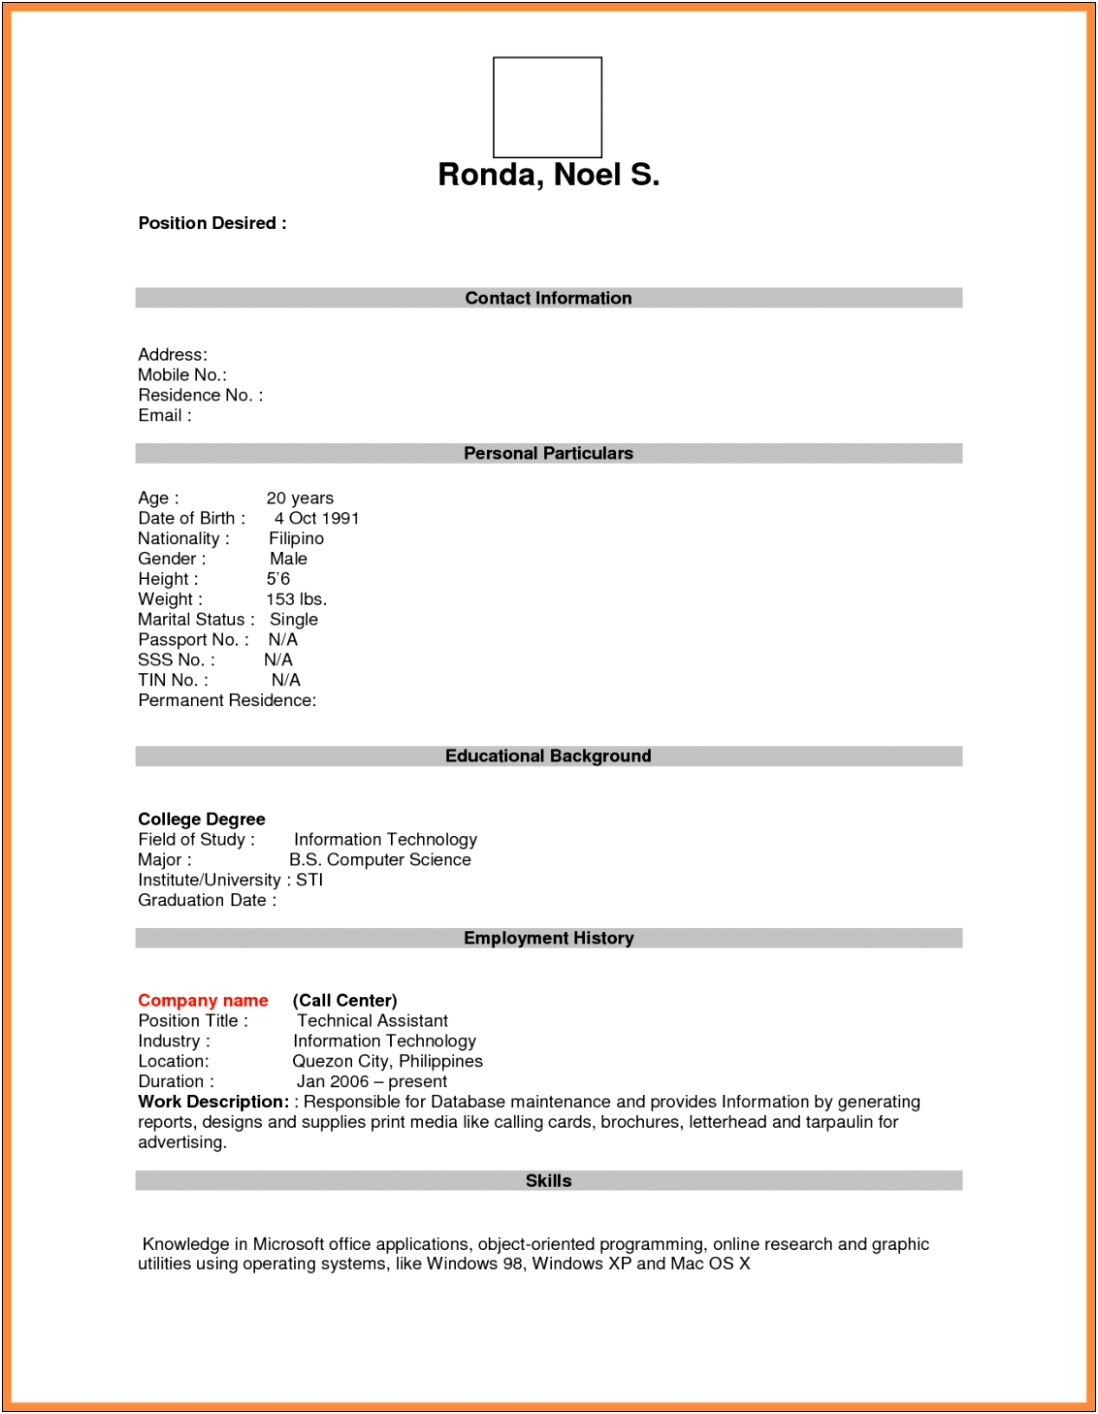 Resume Sample With Horizontal Lines